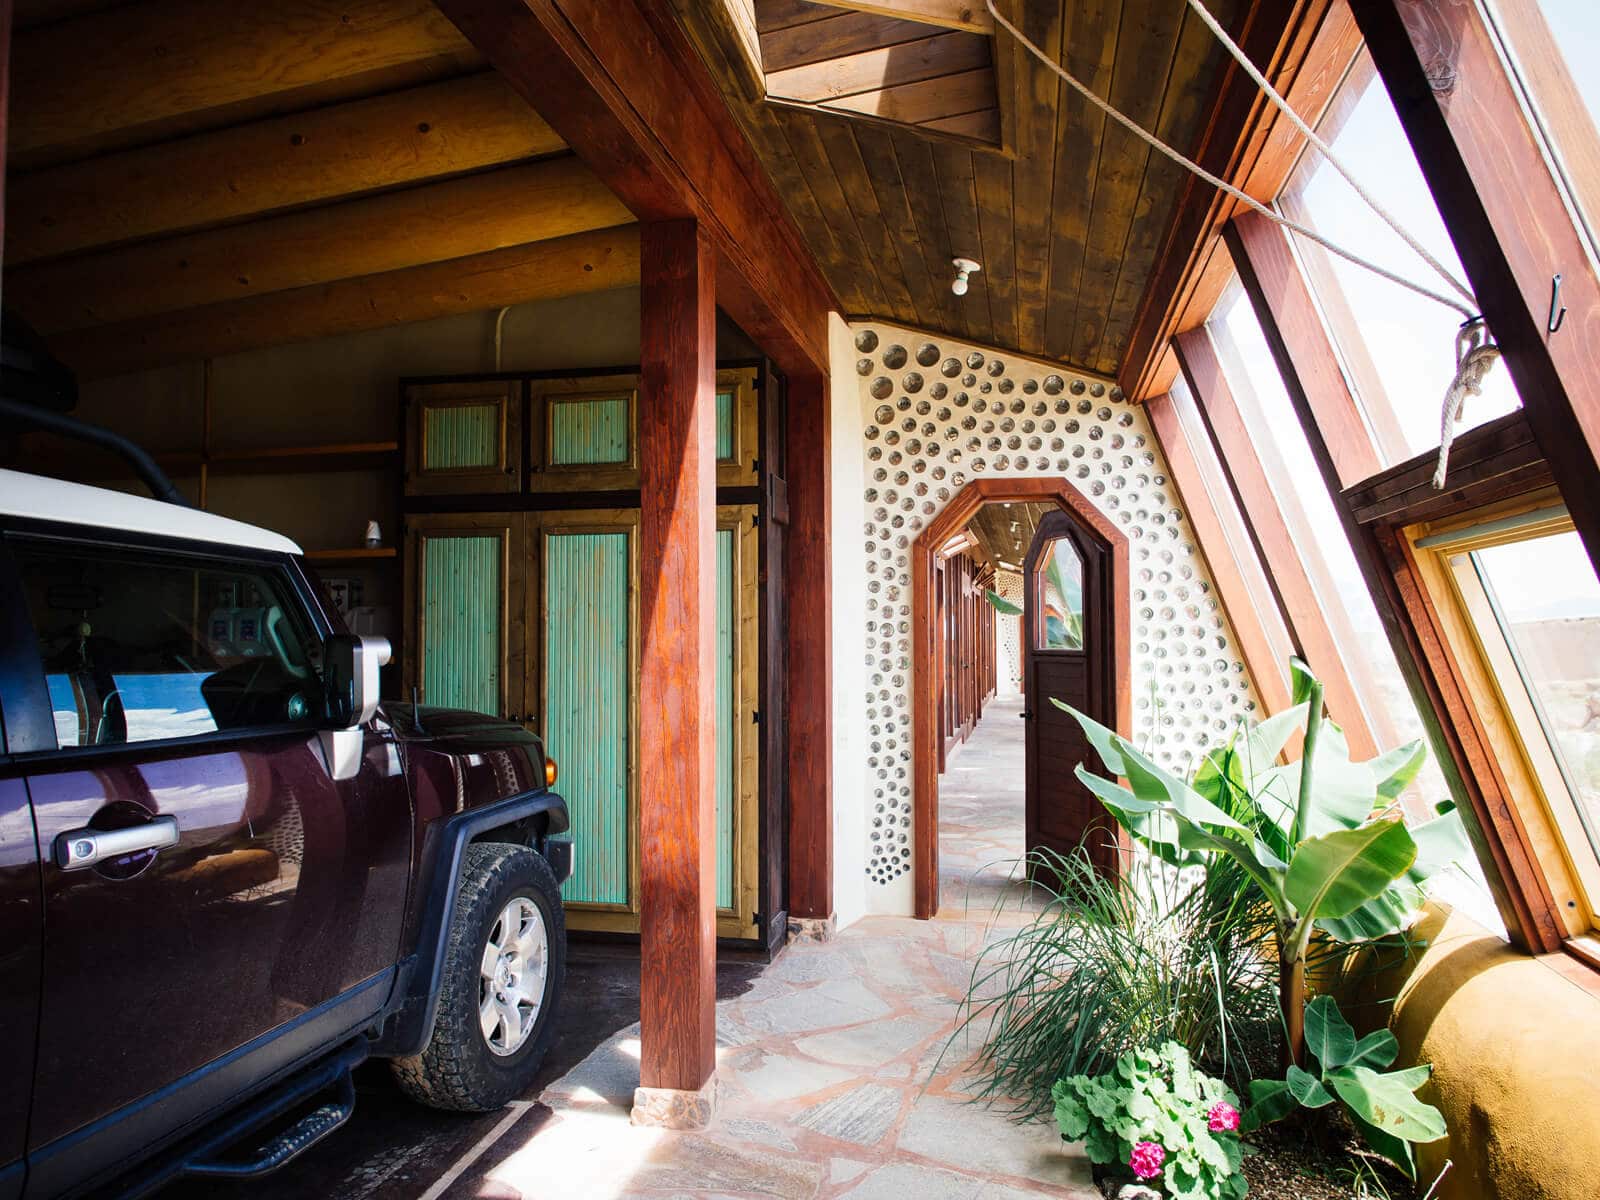 The garage is attached to the house in an Earthship